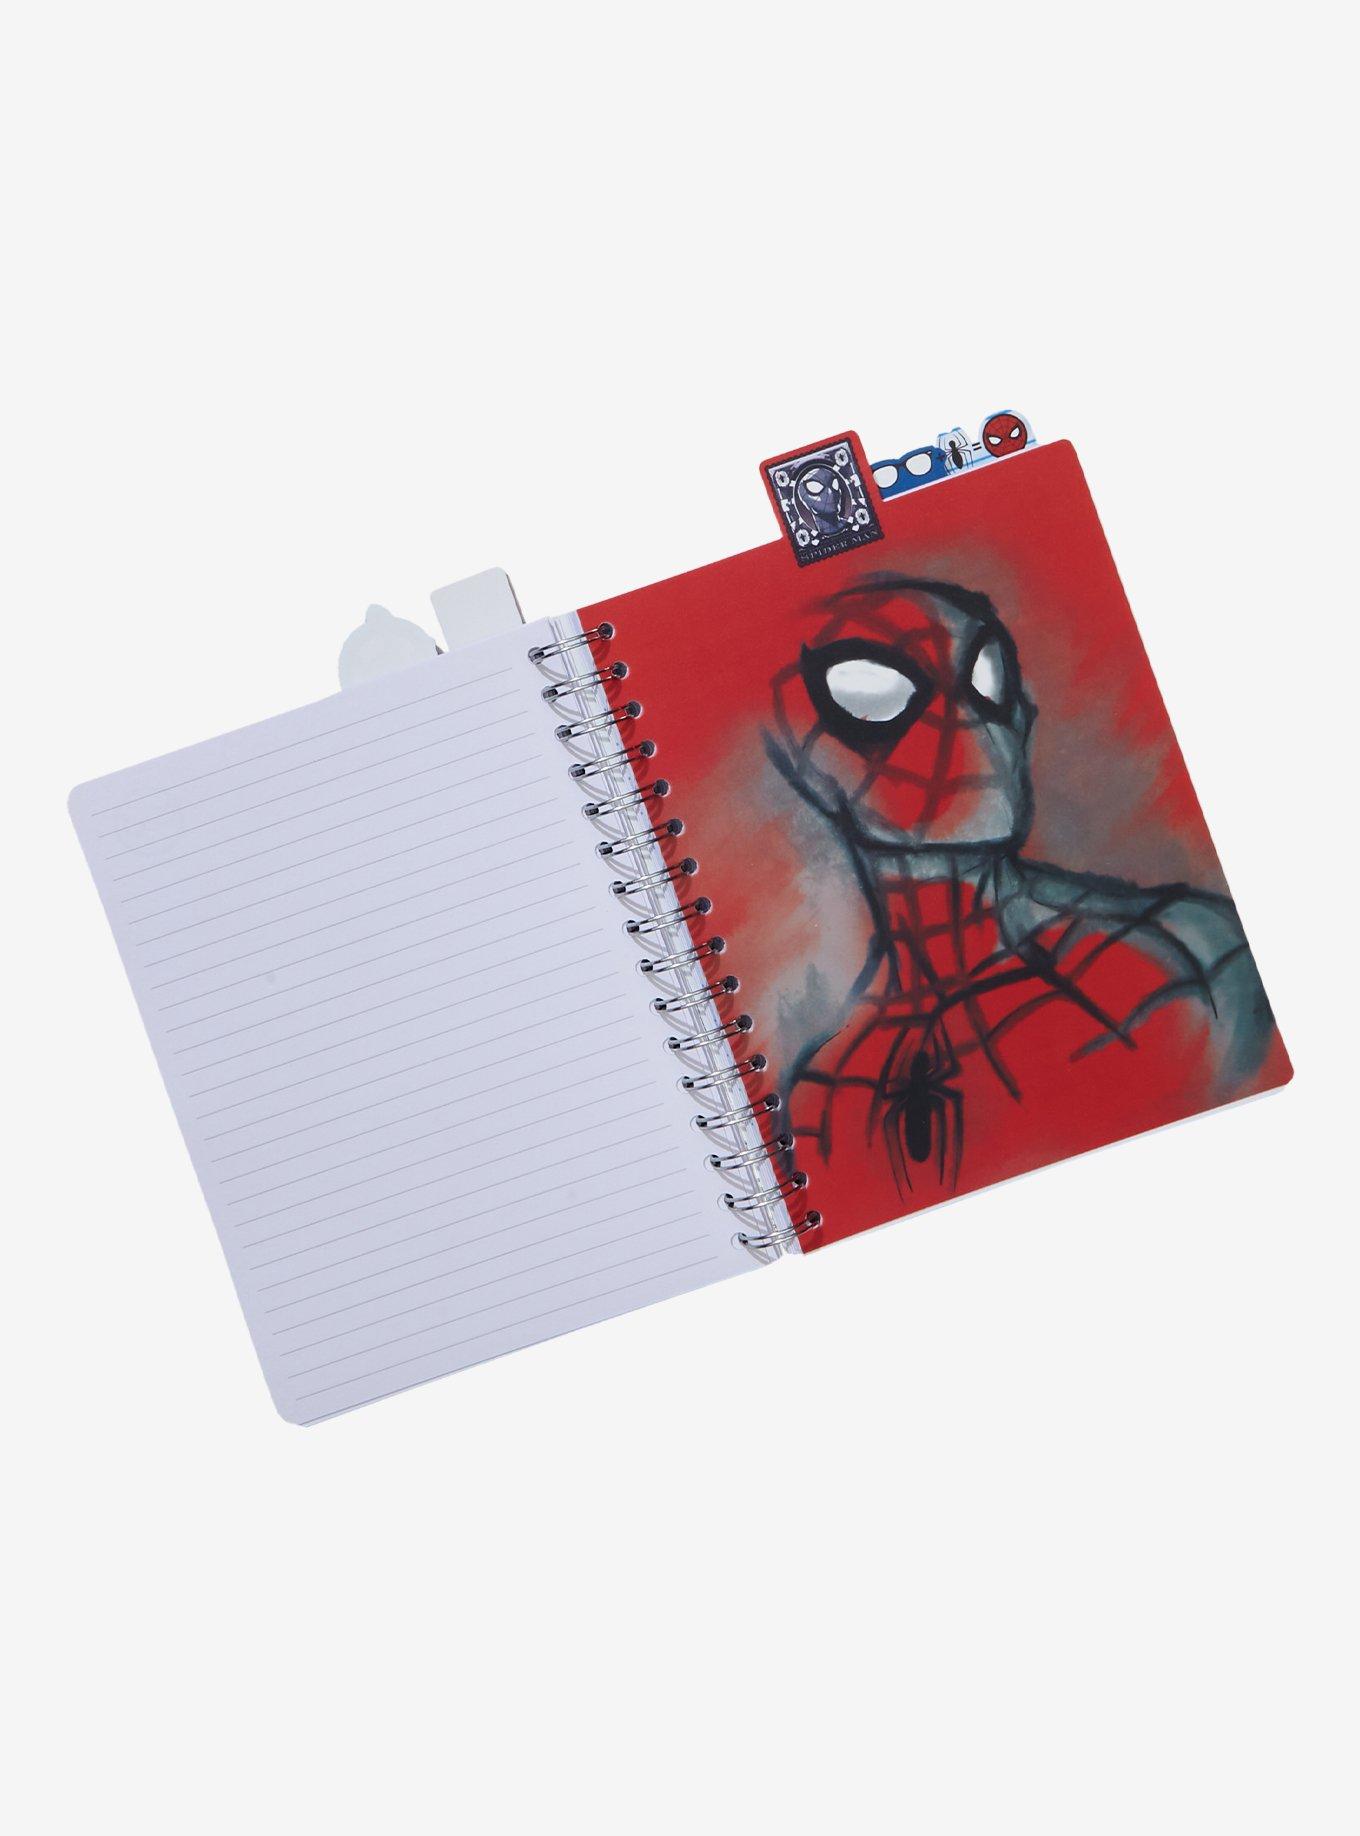 Hot Topic Marvel Spider-Man Daily Bugle Tab Journal